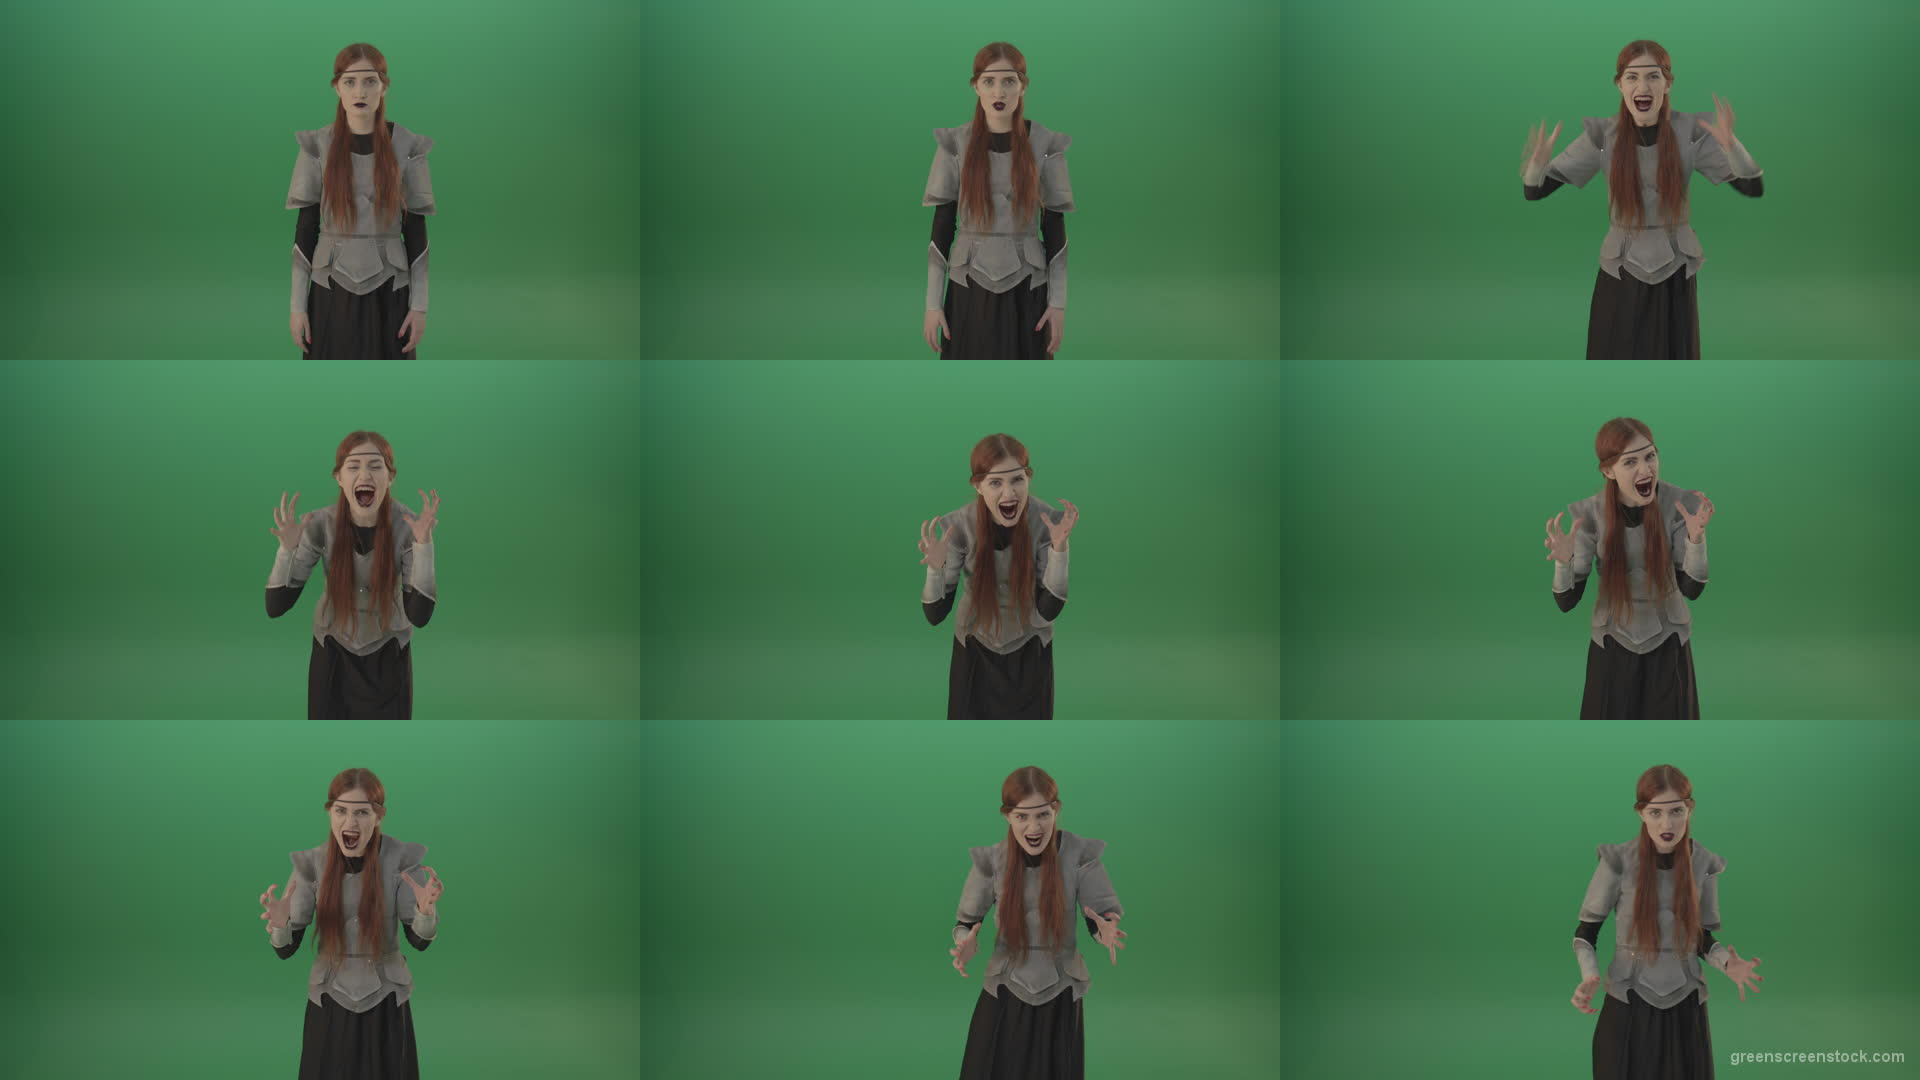 Witch-aggressively-shouts-at-the-camera-provoking-the-viewer Green Screen Stock